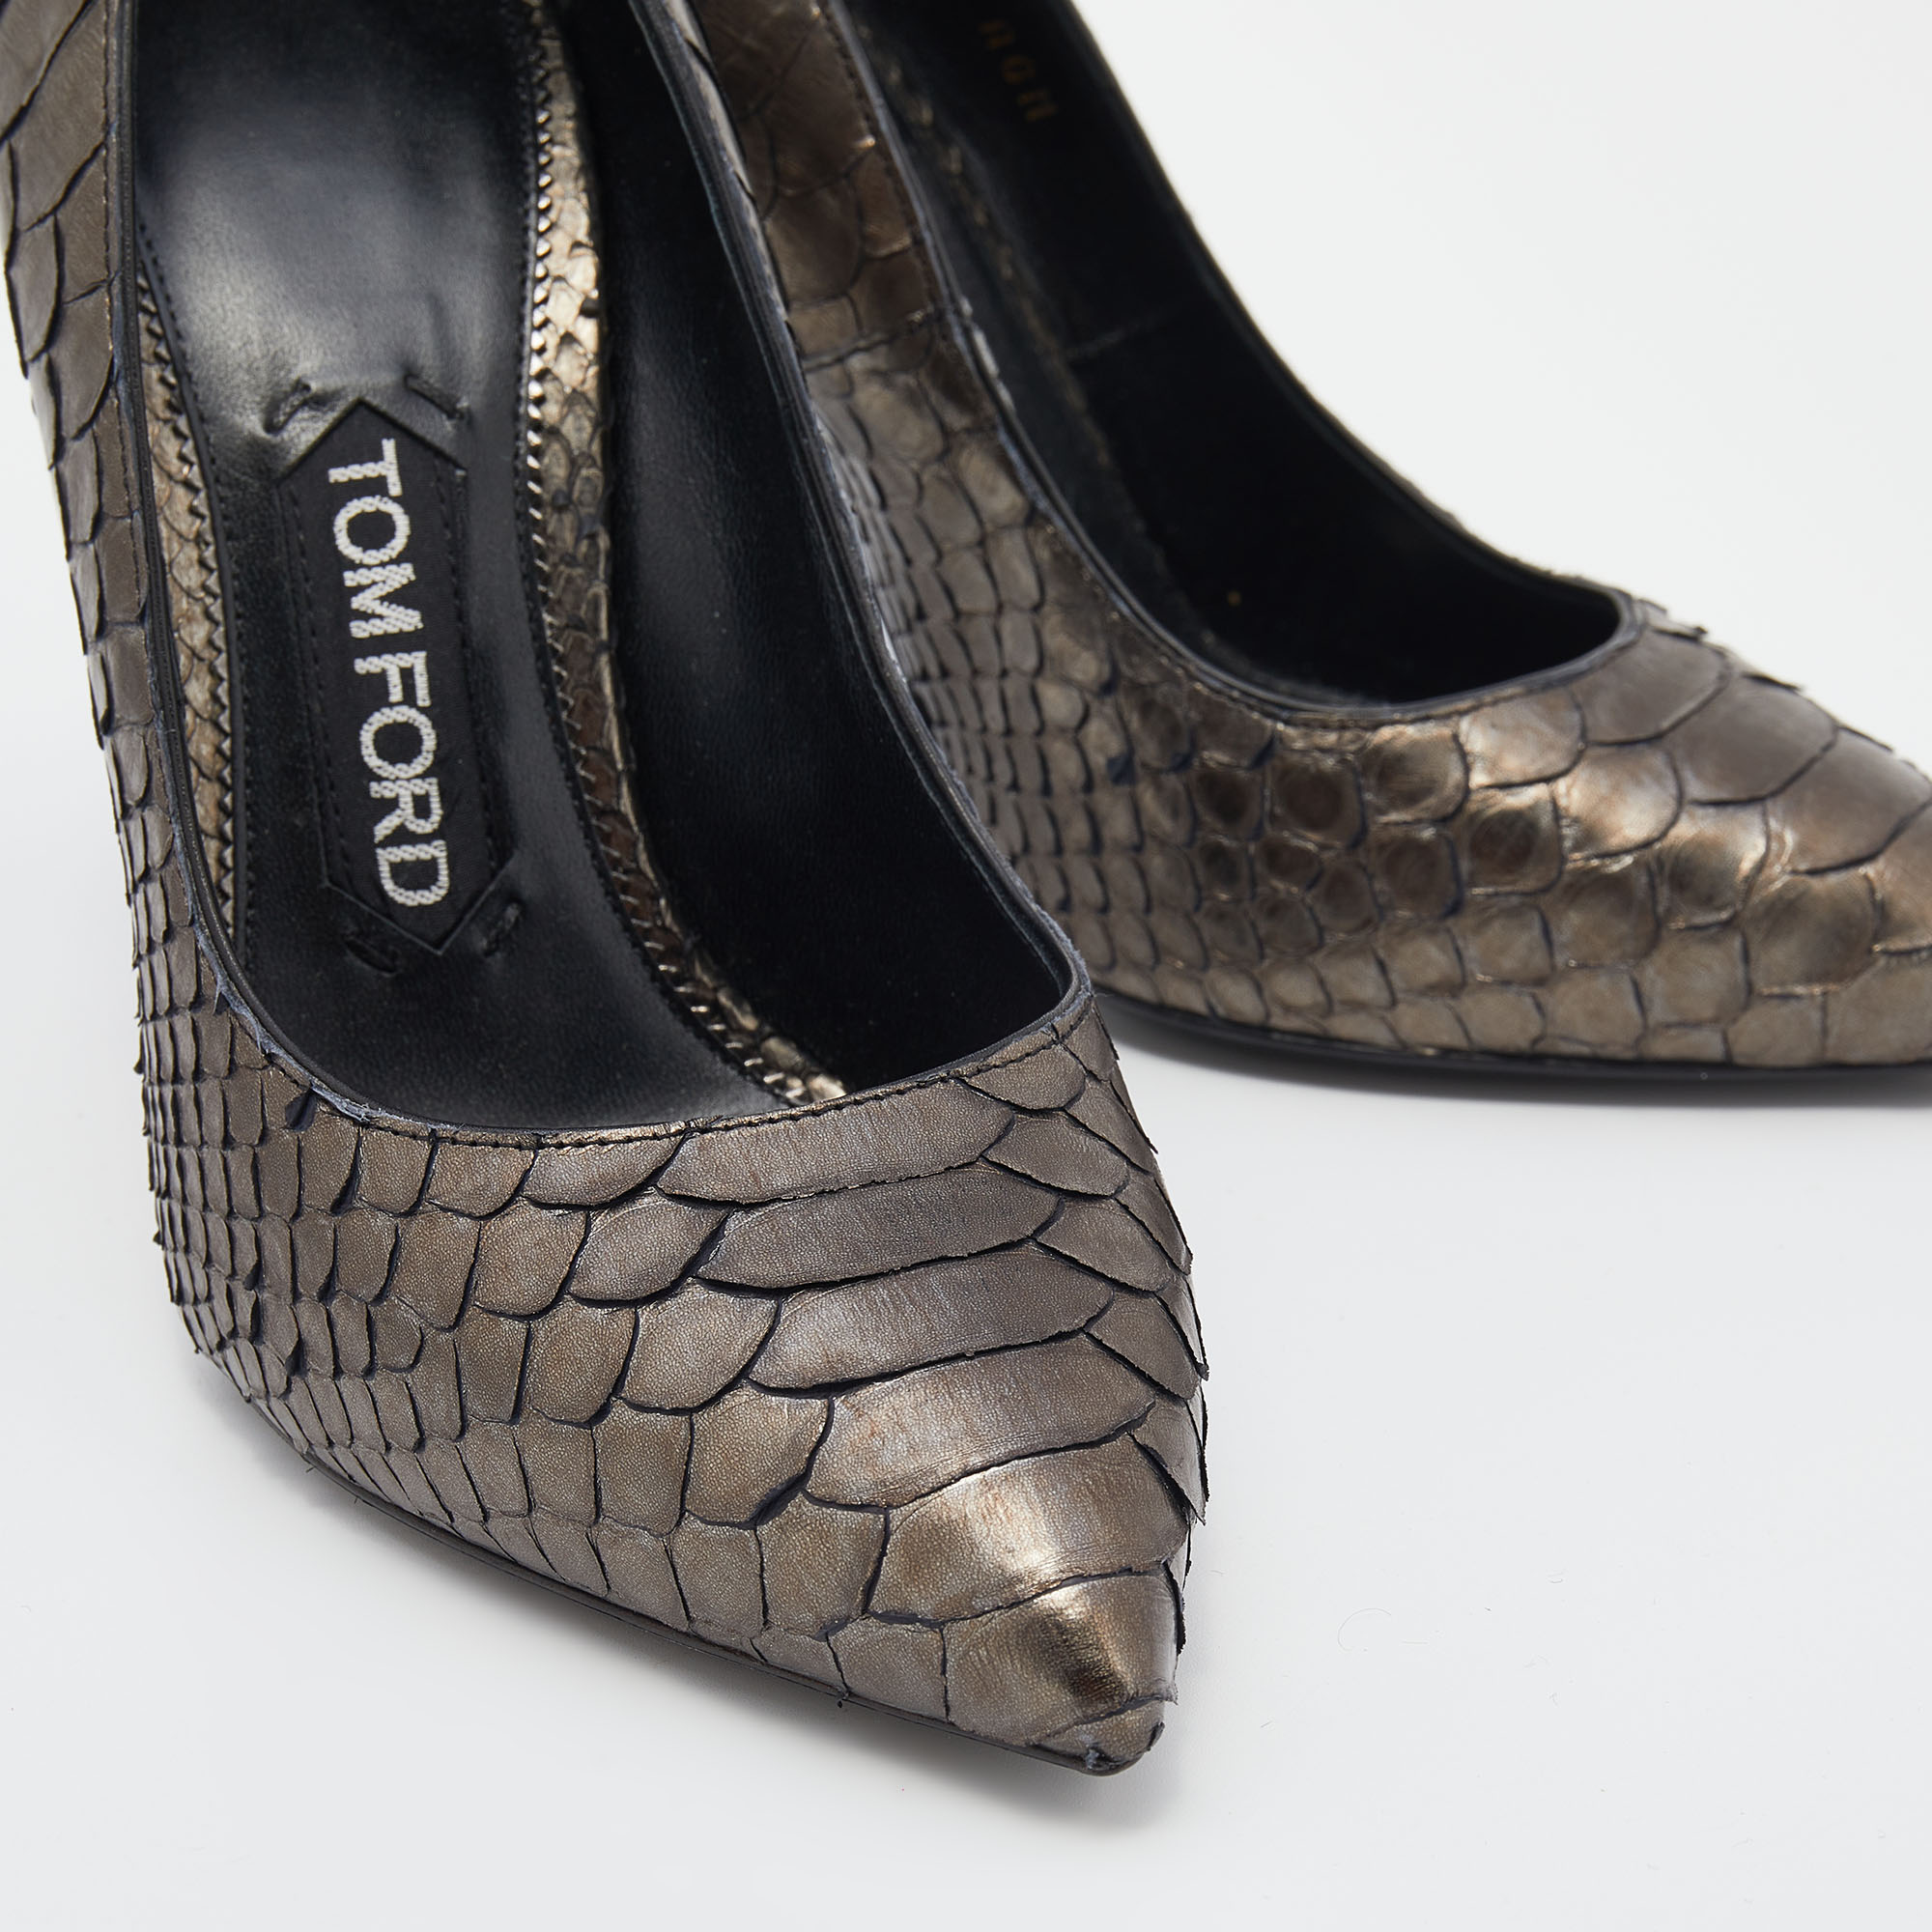 Tom Ford Metallic Grey Python Leather Pointed Toe Pumps Size 35